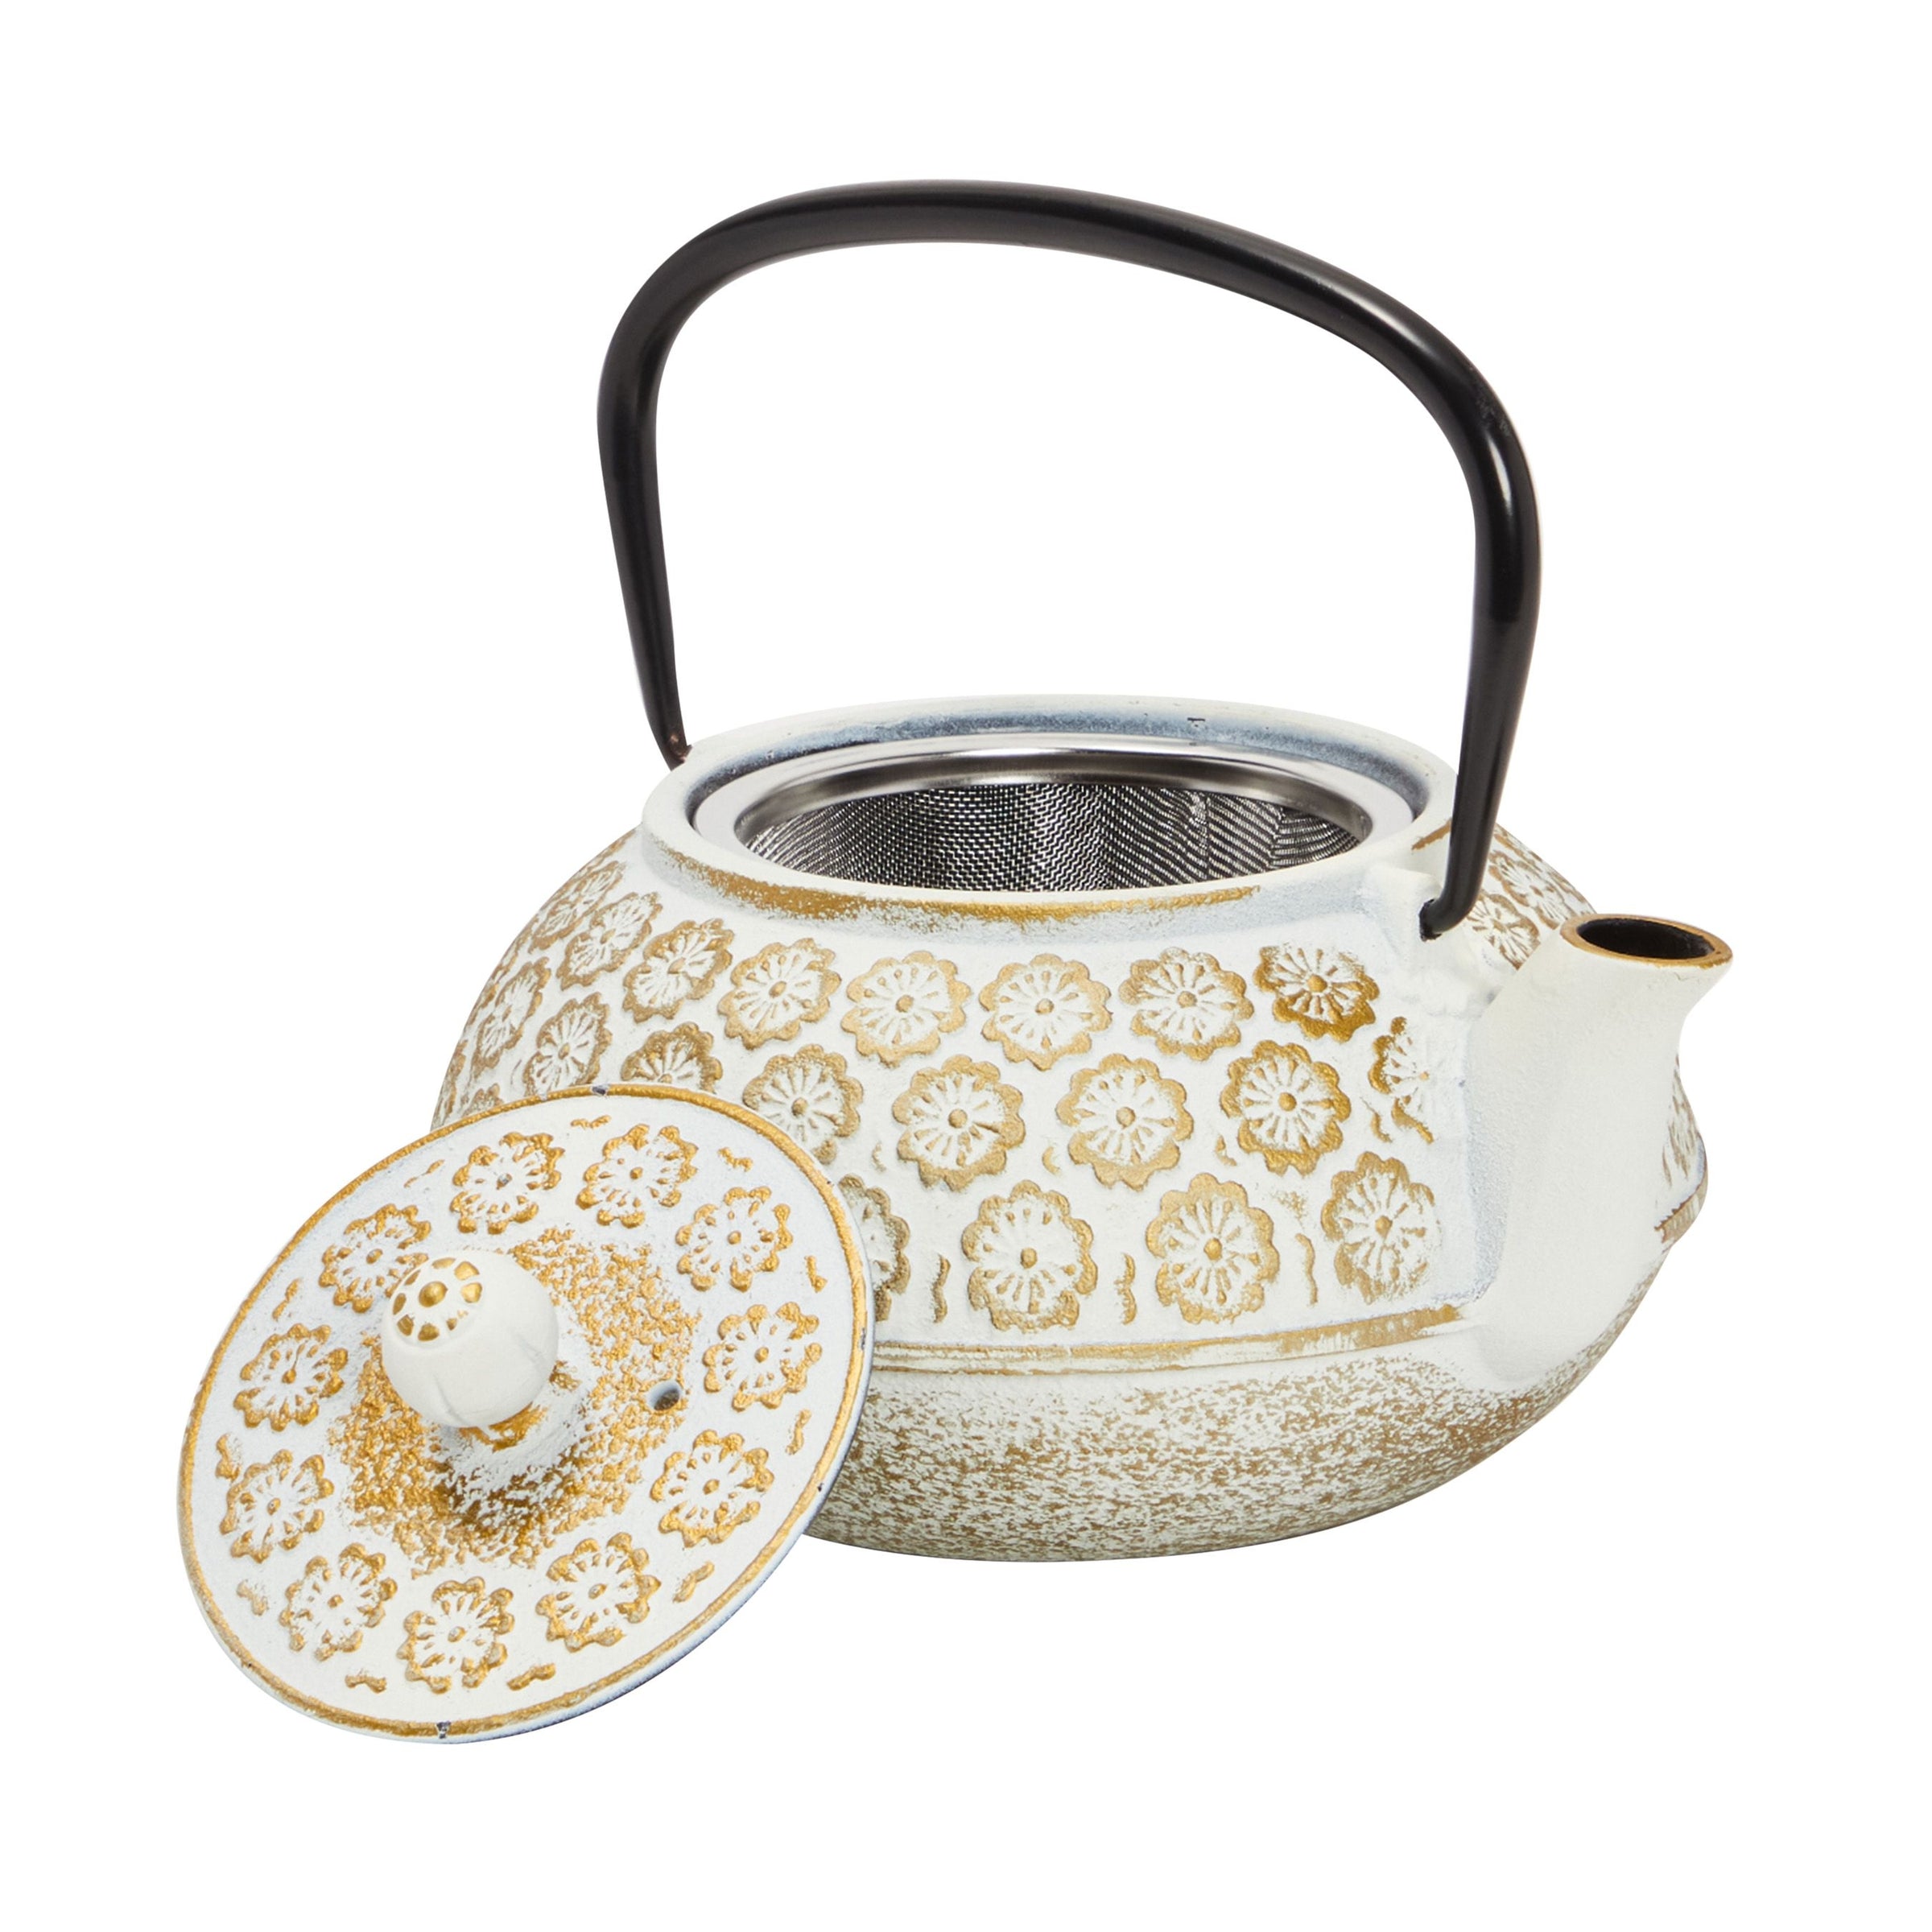 Juvale Cast Iron Tea Pot With Stainless Steel Loose Leaf Infuser